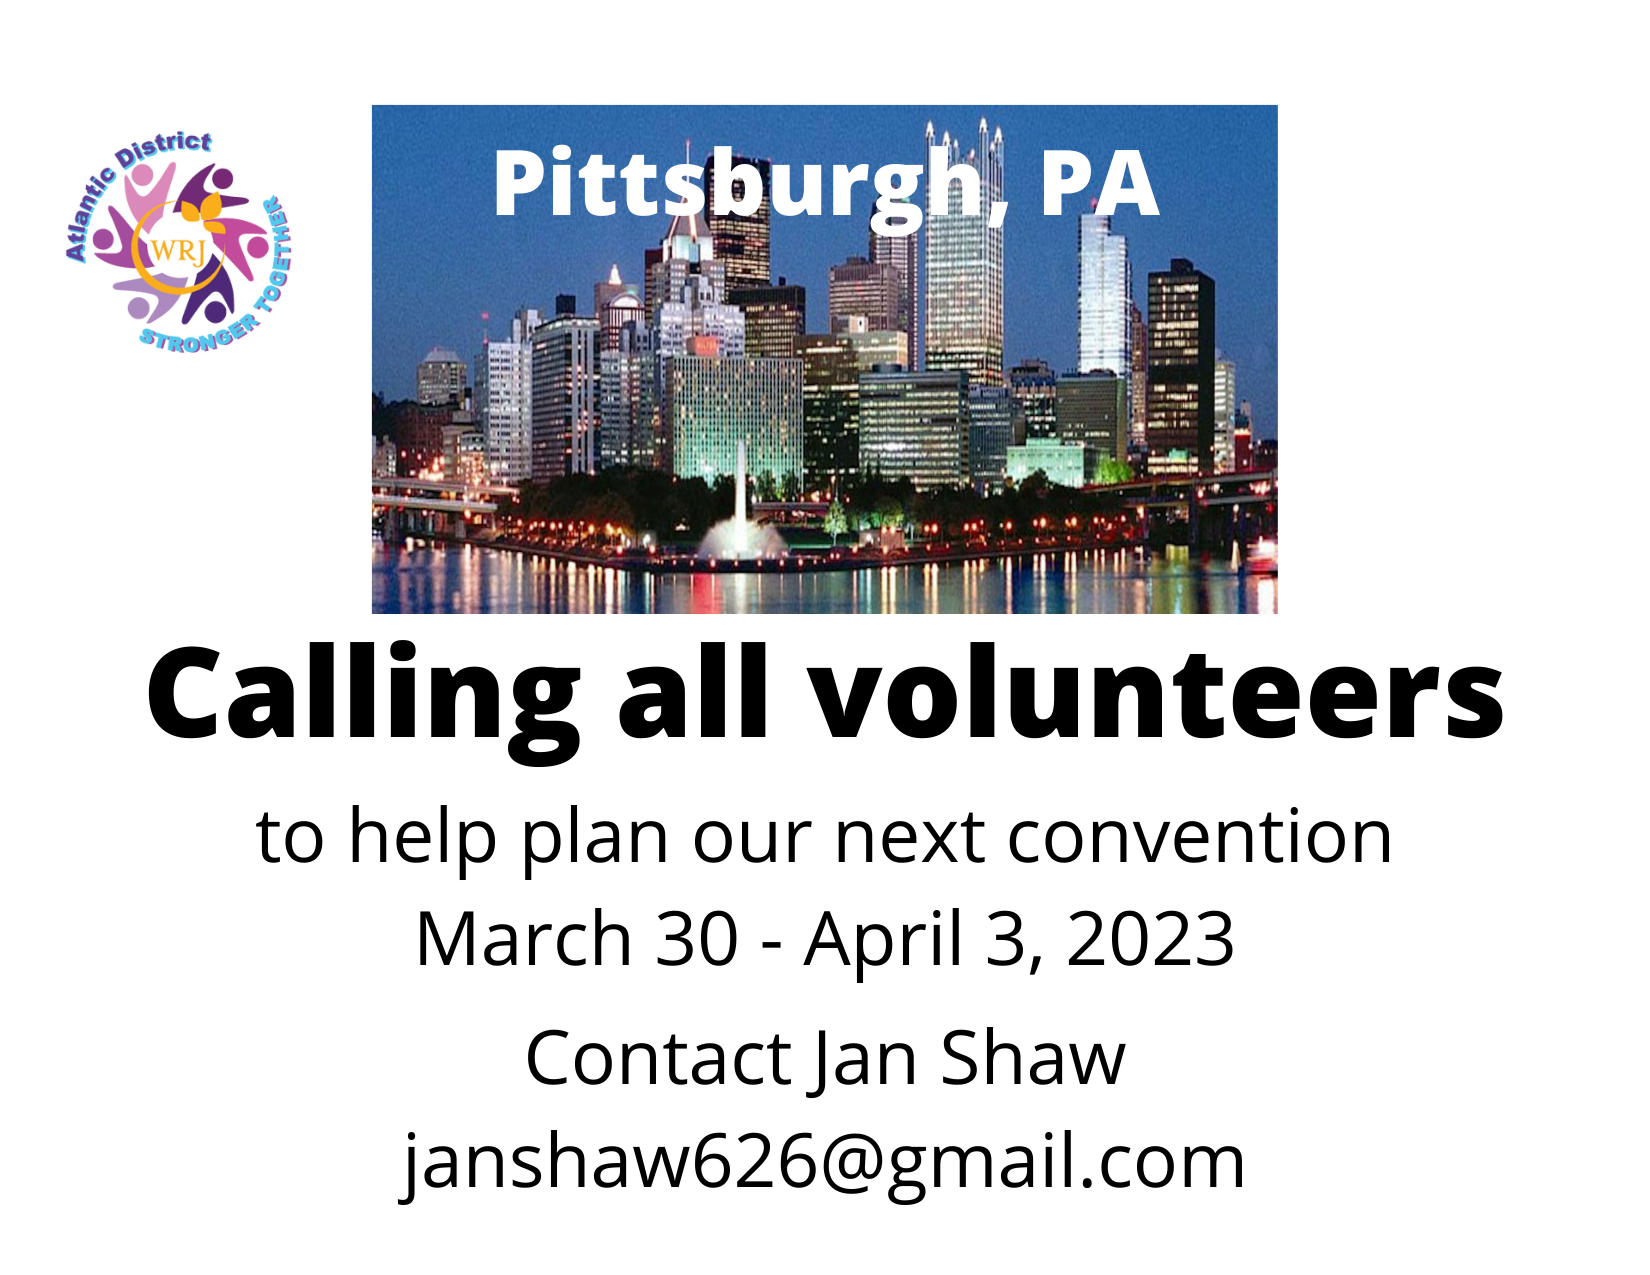 Calling all volunteers for Convention 2023 in Pittsburgh, PA